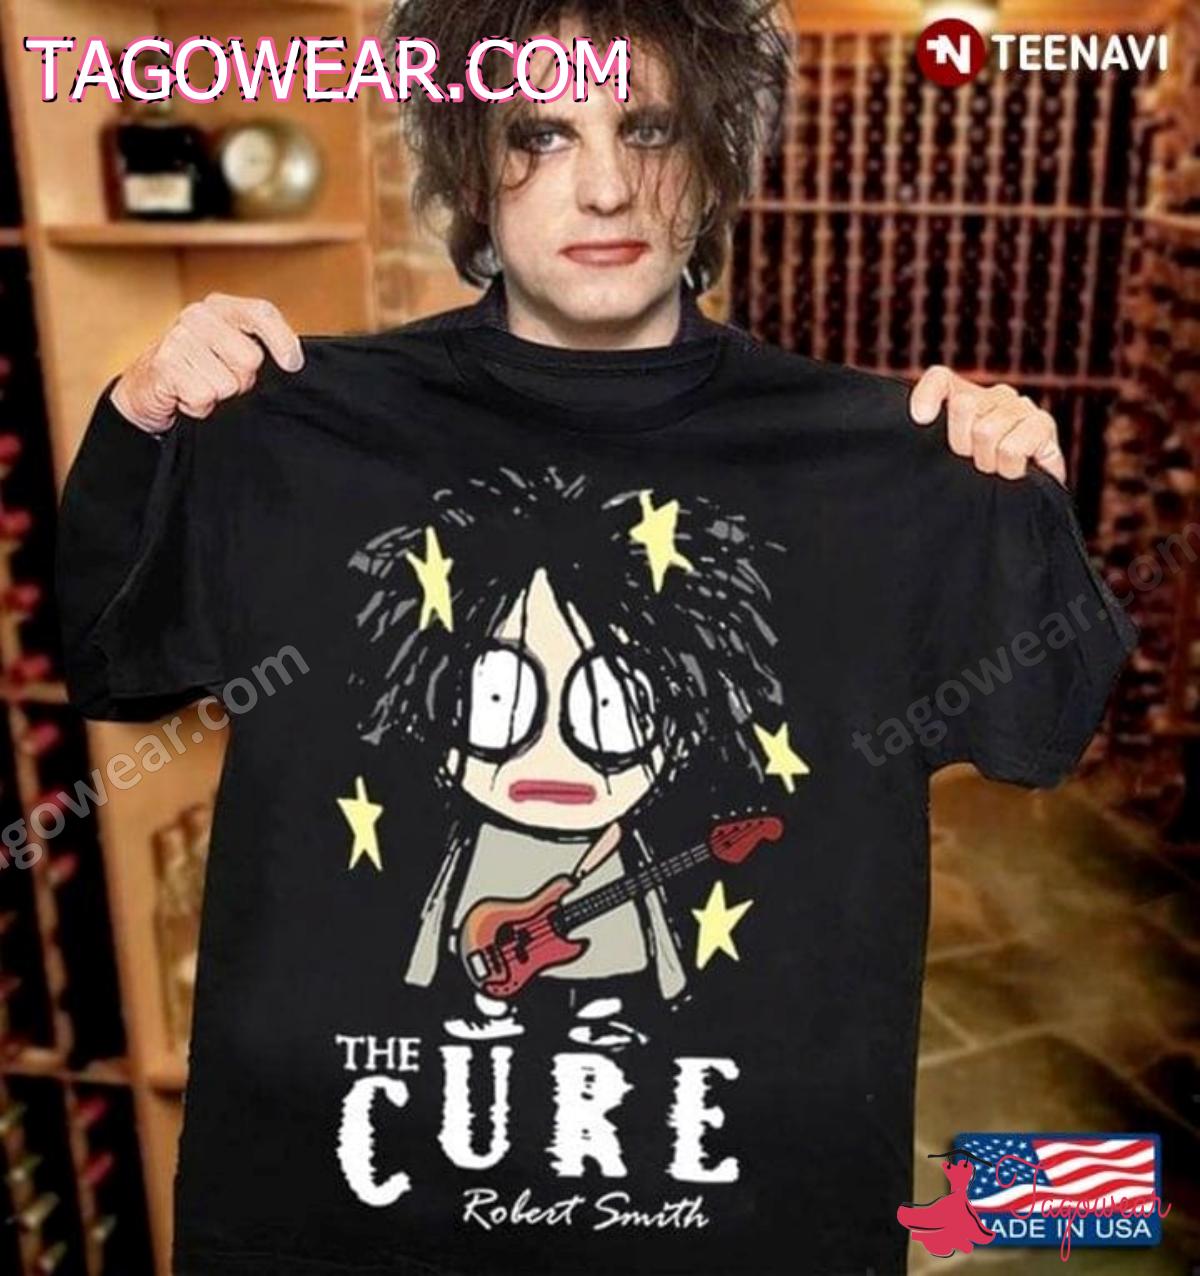 The Cure Robert Smith Funny Rock Shirt